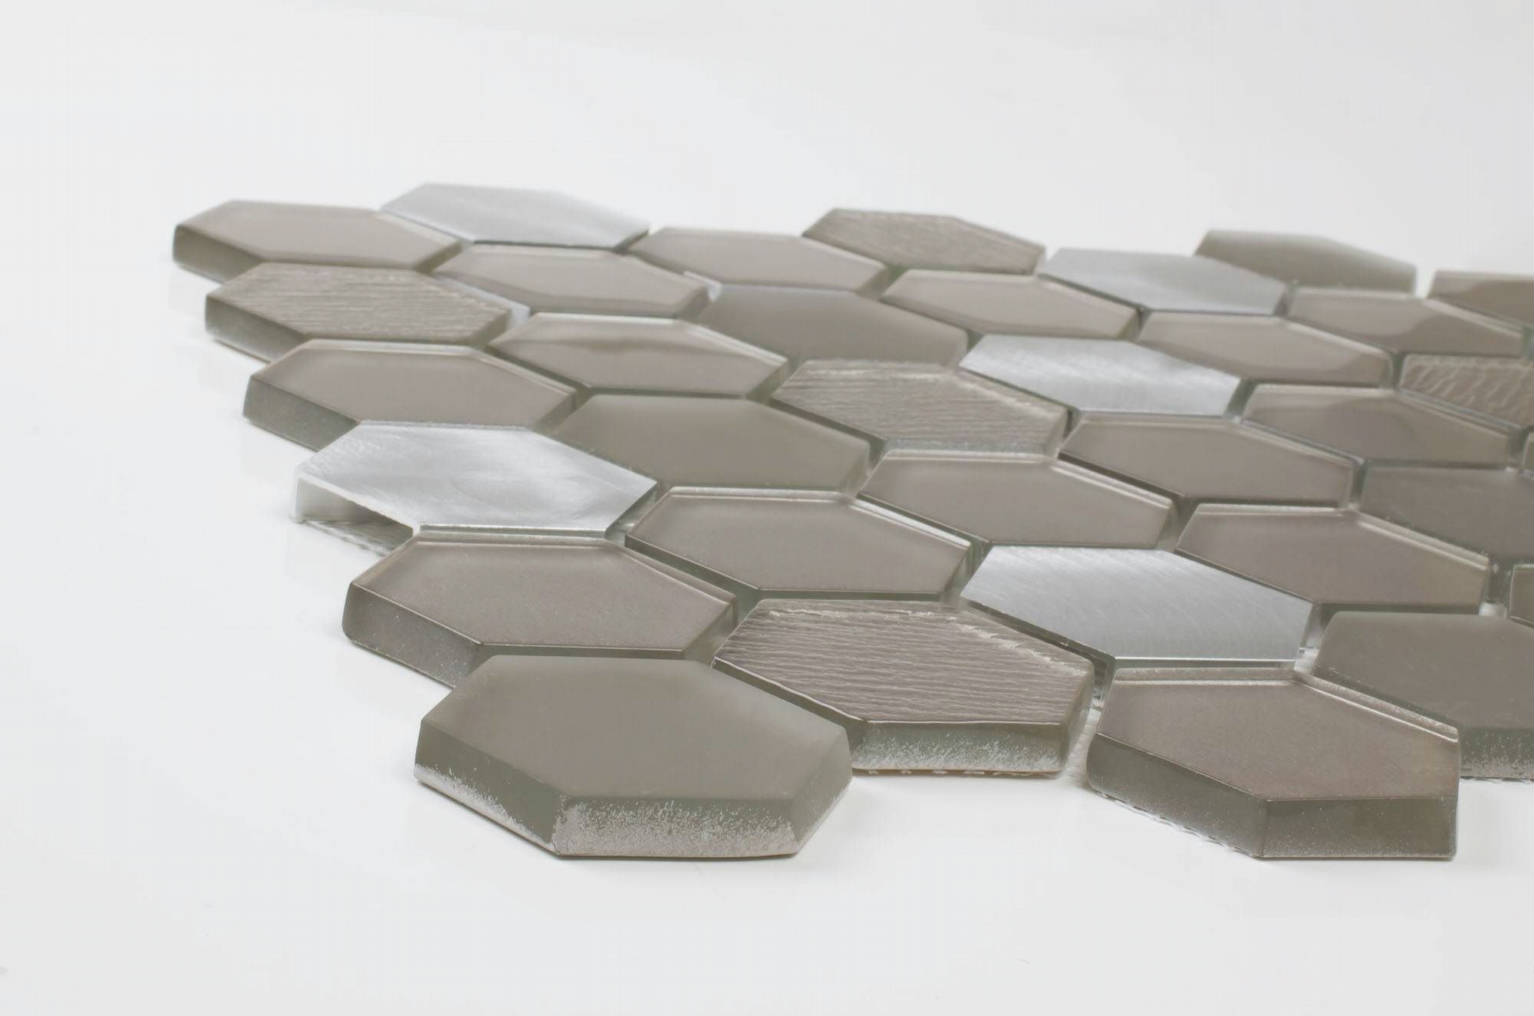 HX-237 | Stones And More | Finest selection of Mosaics, Glass, Tile and Stone